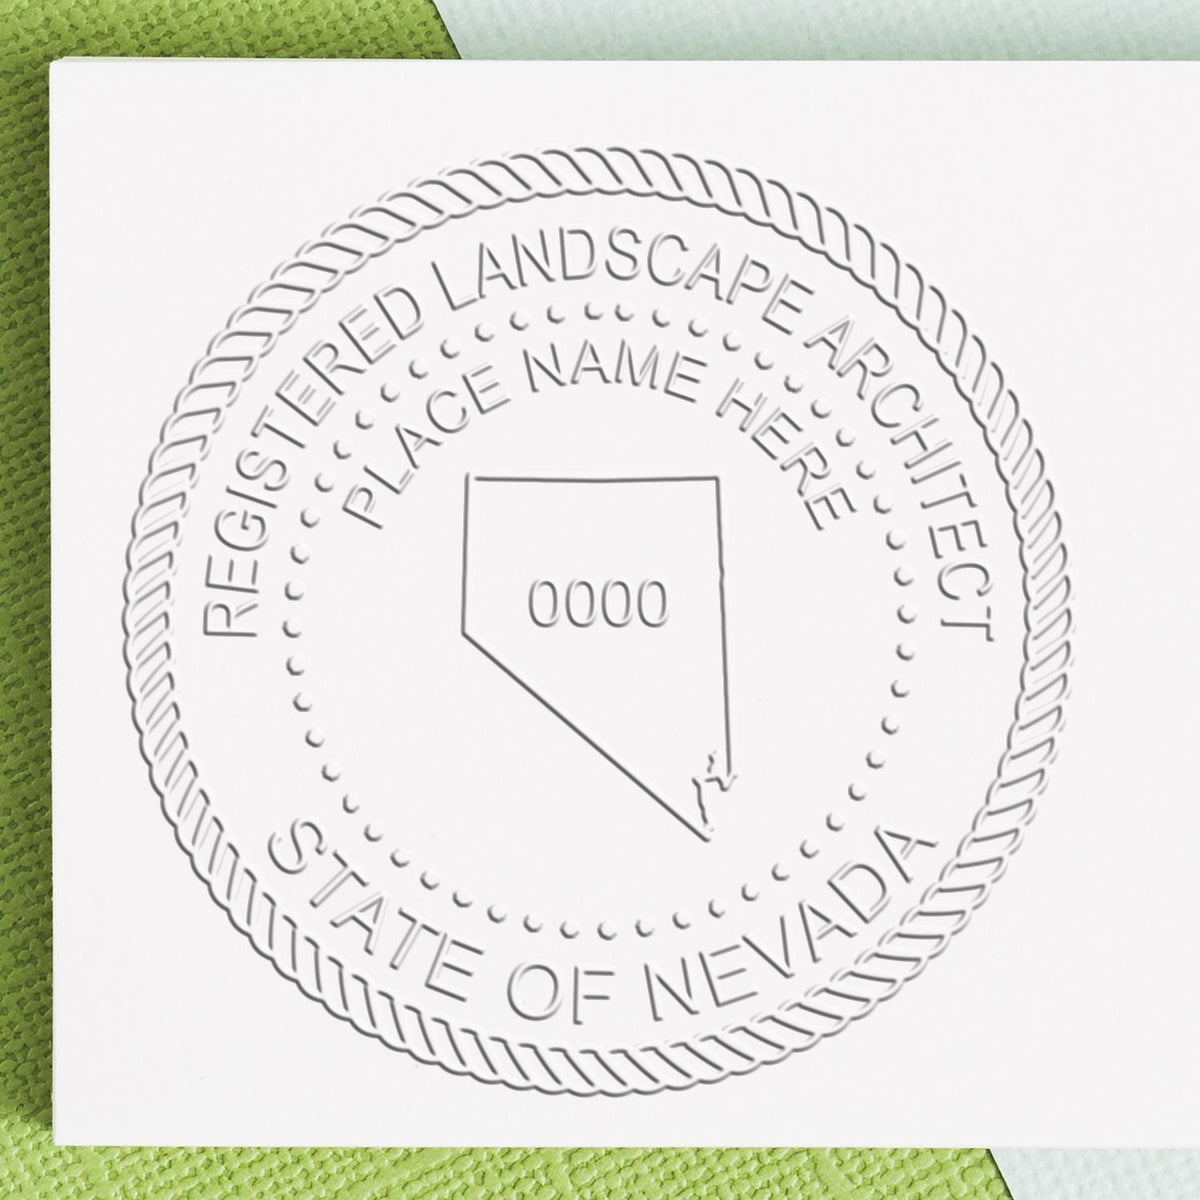 A stamped impression of the Soft Pocket Nevada Landscape Architect Embosser in this stylish lifestyle photo, setting the tone for a unique and personalized product.